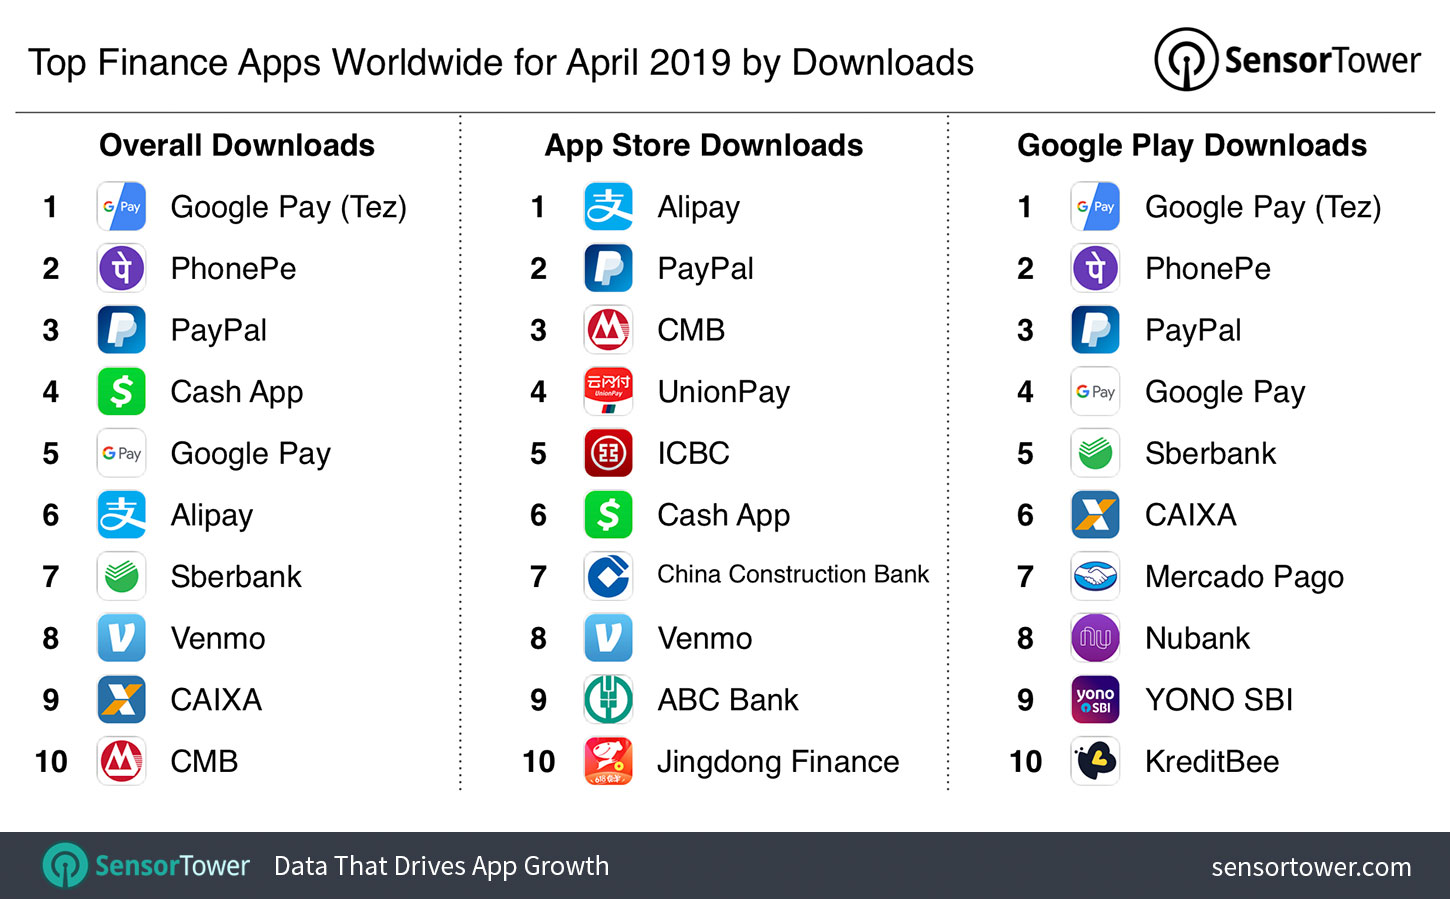 Top Finance Apps Worldwide for April 2019 by Downloads